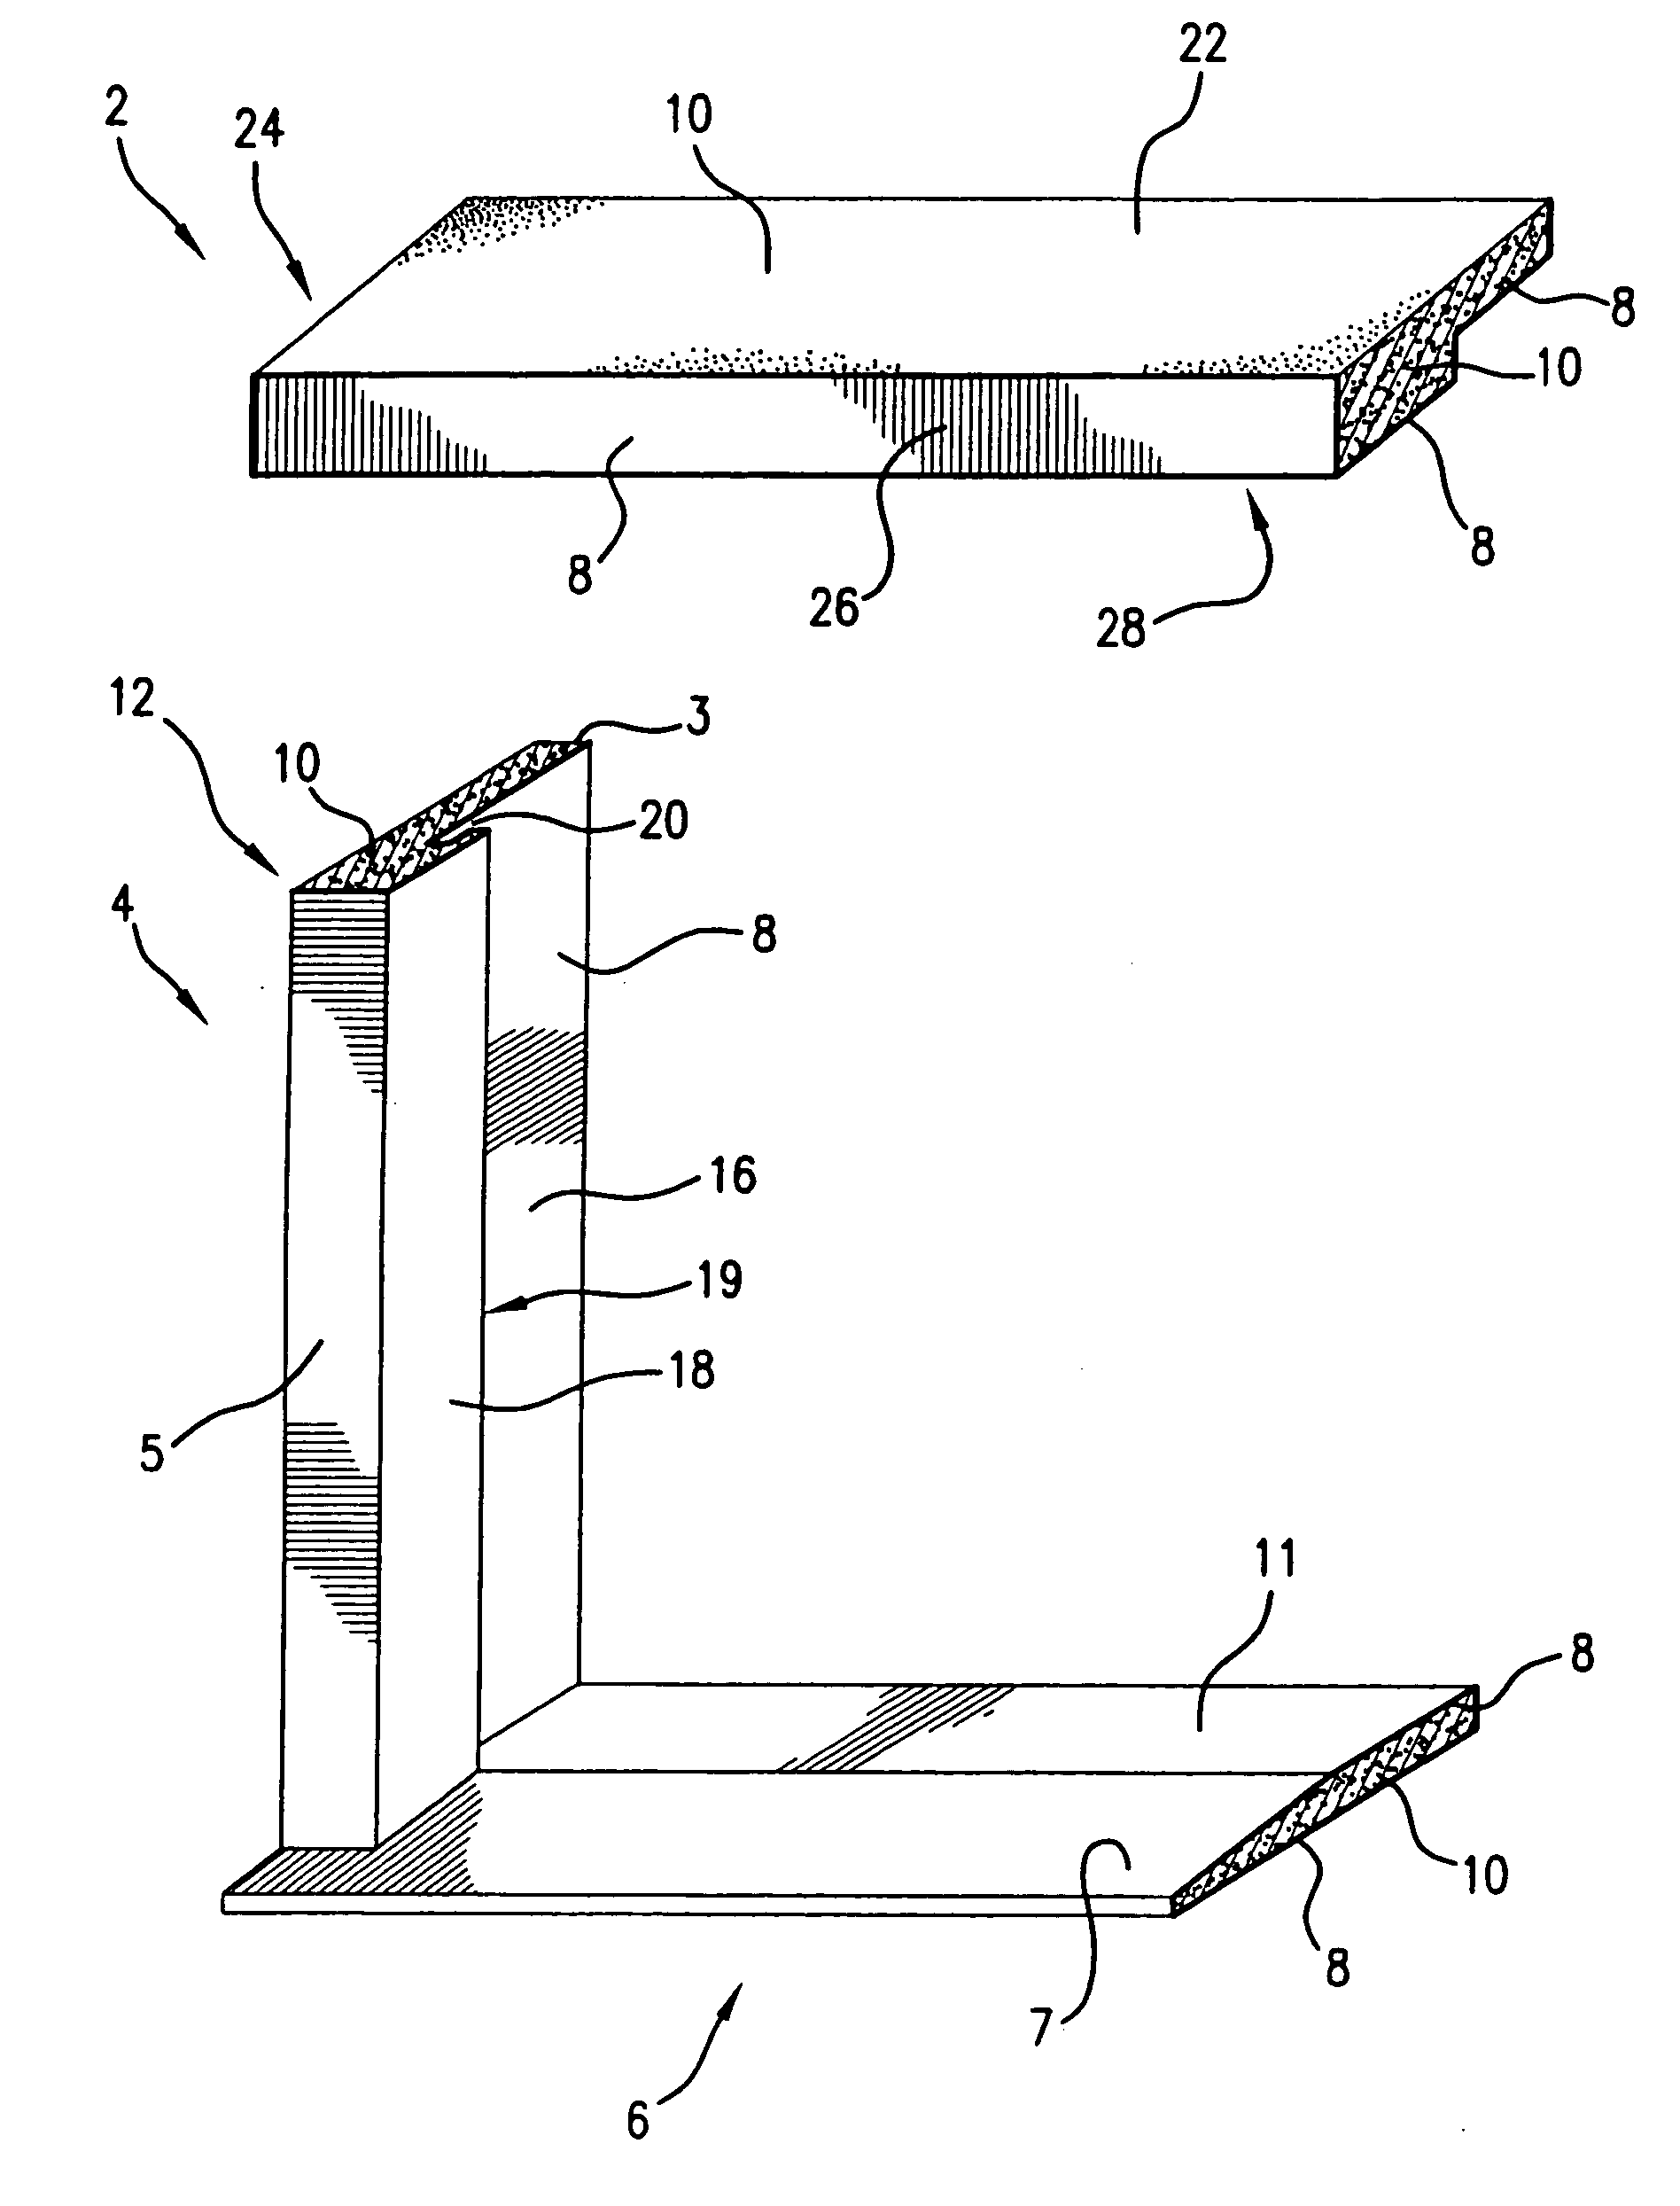 Molded polymeric structural members and compositions and methods for making them